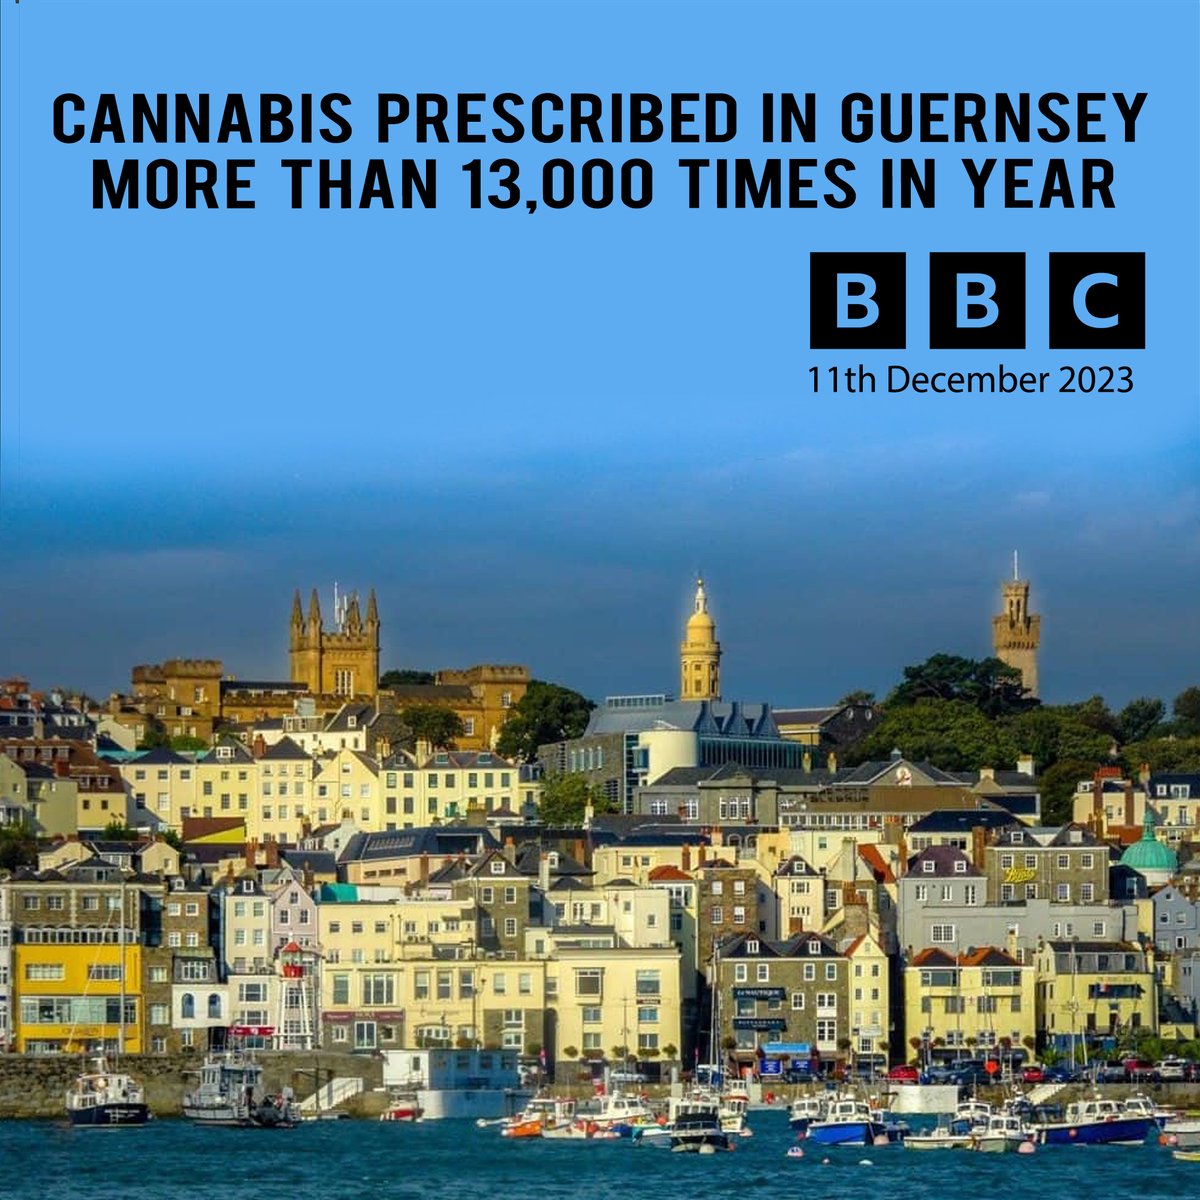 NEWS You Might Have Missed                           
                                
#guernsey #guernseylife #mmj #mmjcommunity #global #medical #education #patient  #patientsafety #patientsfirst